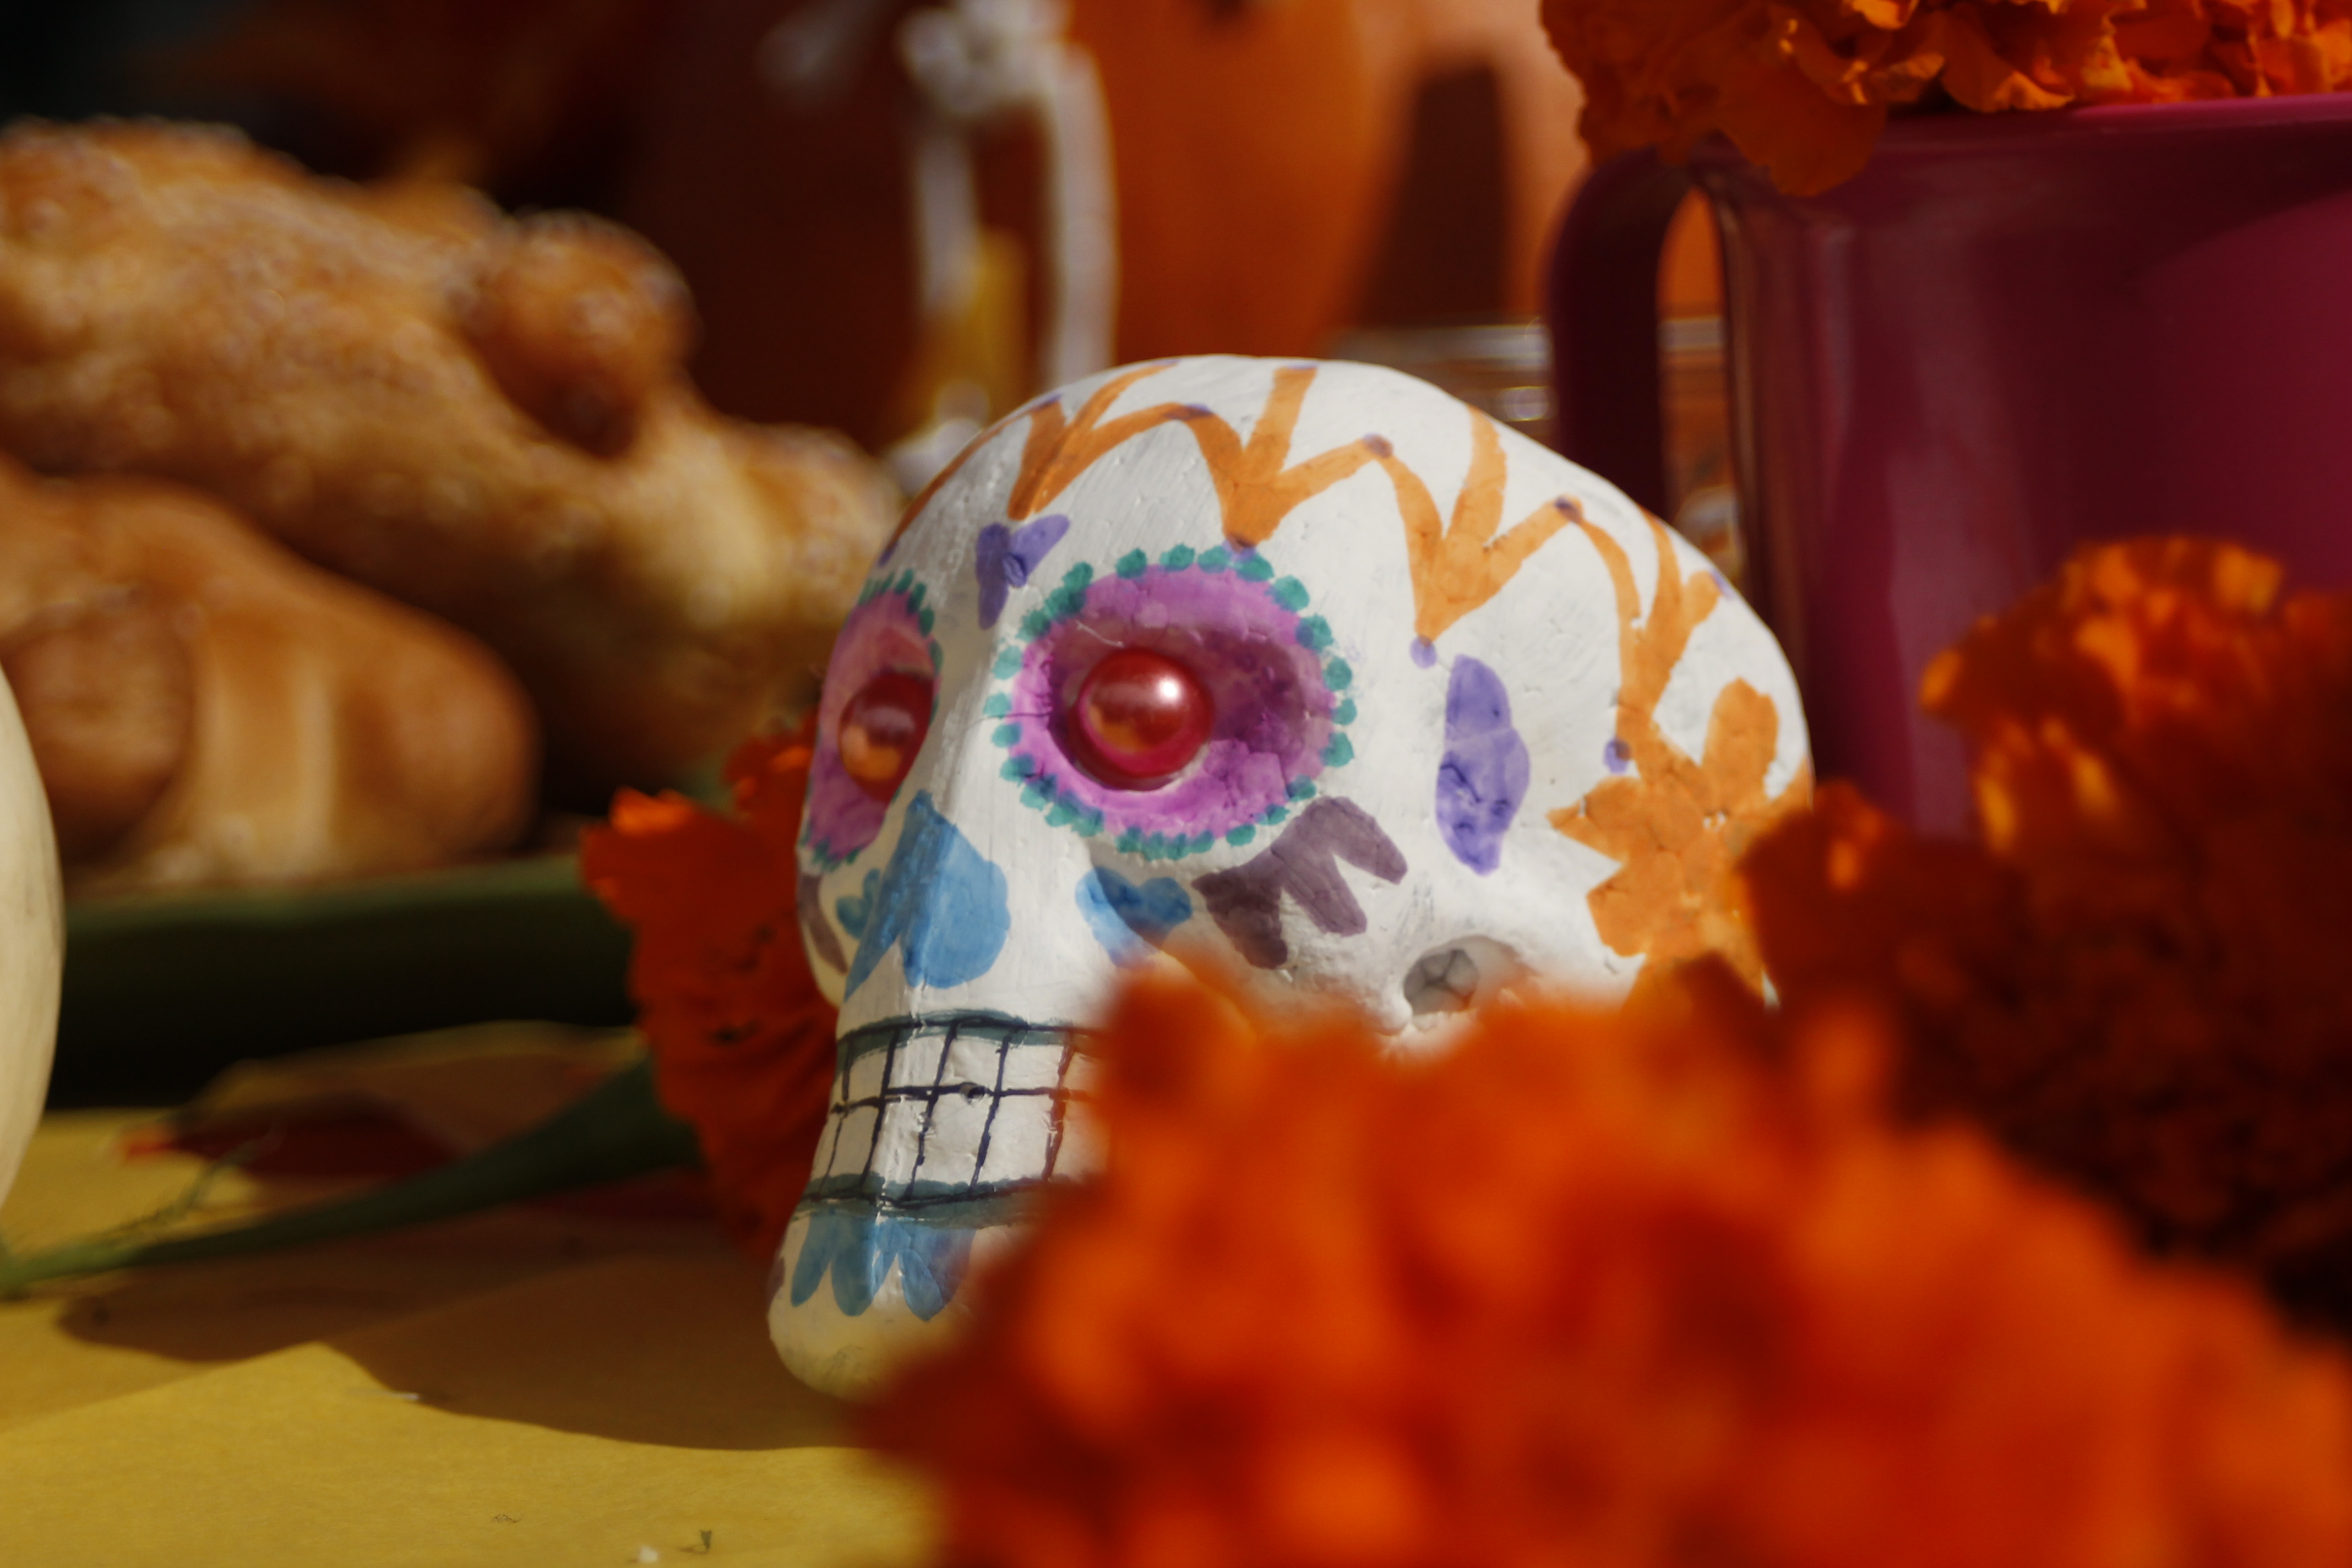 PUENTES decorated their club booth in a Dias de las Muertos theme with sugar skulls, ofertas, and marigolds at the Halloween Escape event Oct. 30, 2014. (Angela Marie Samora/The Telescope)